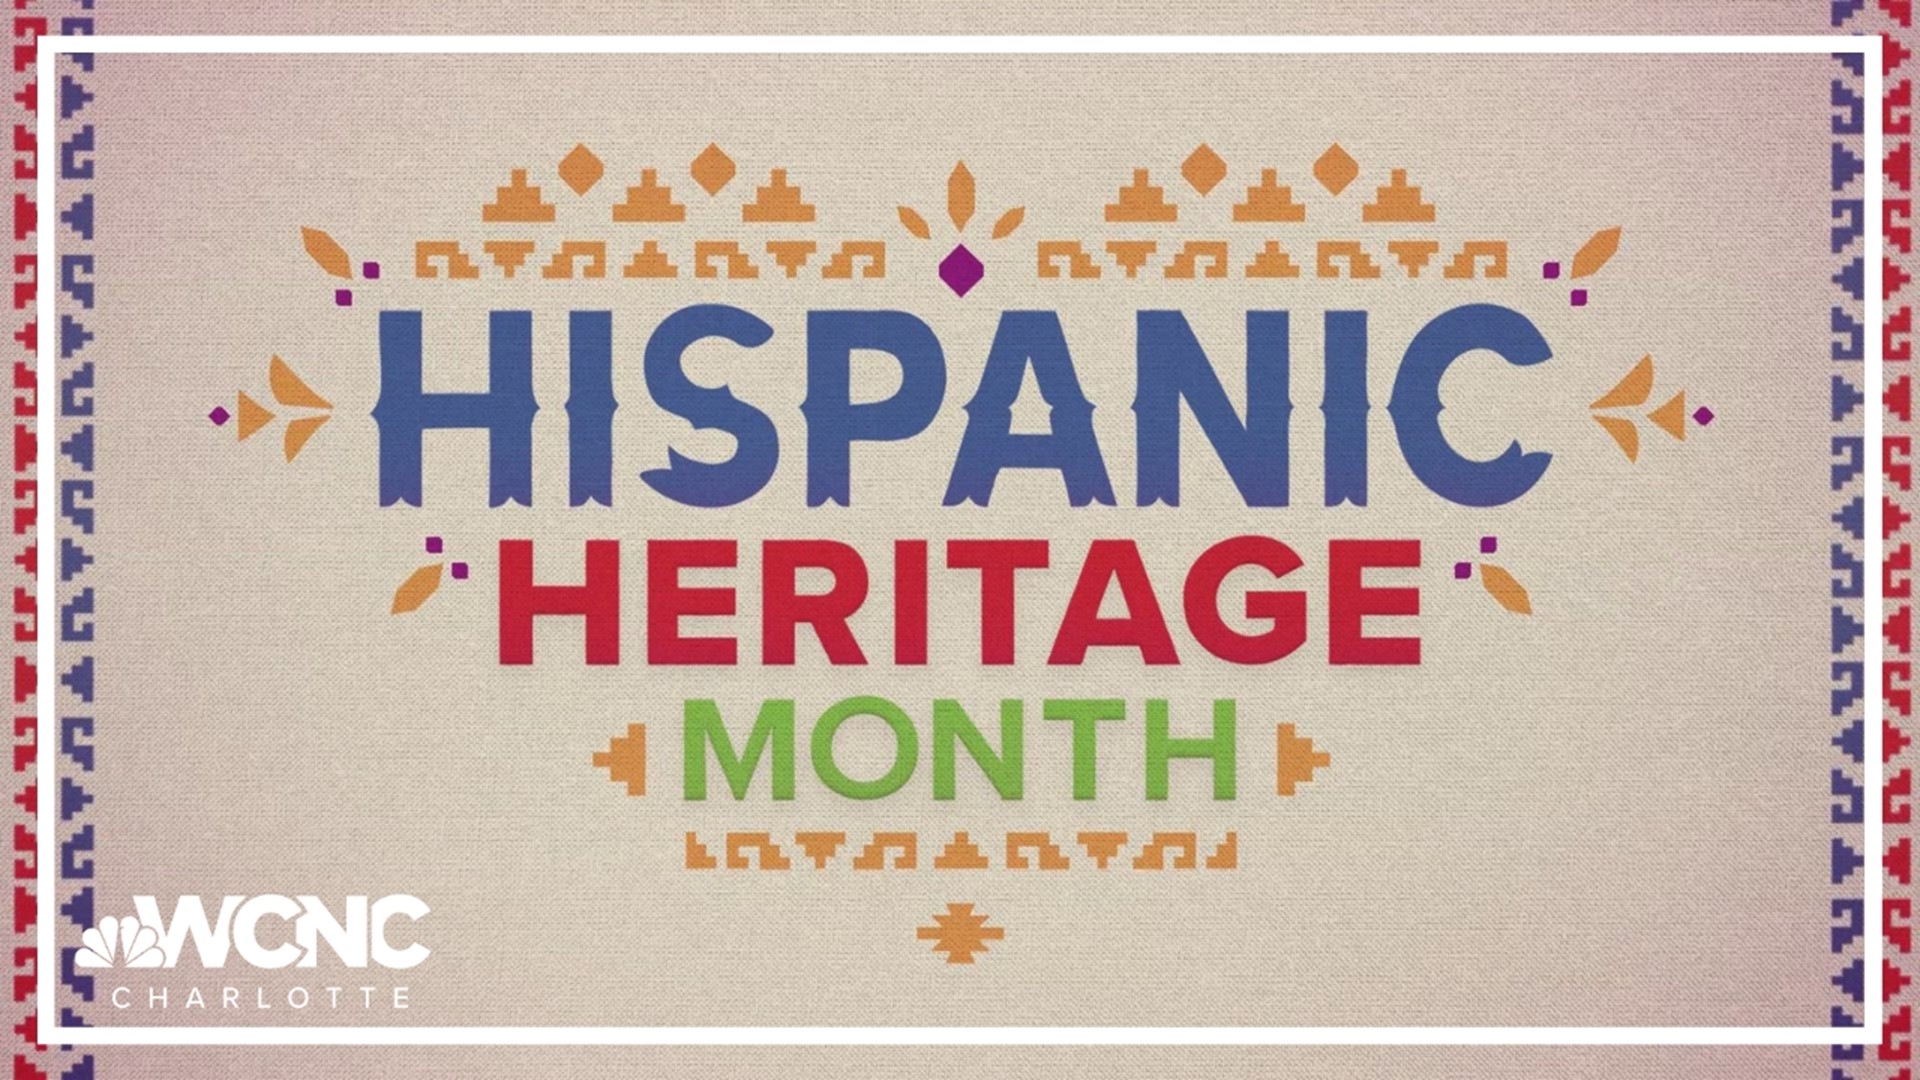 National Hispanic Heritage Month in the United States